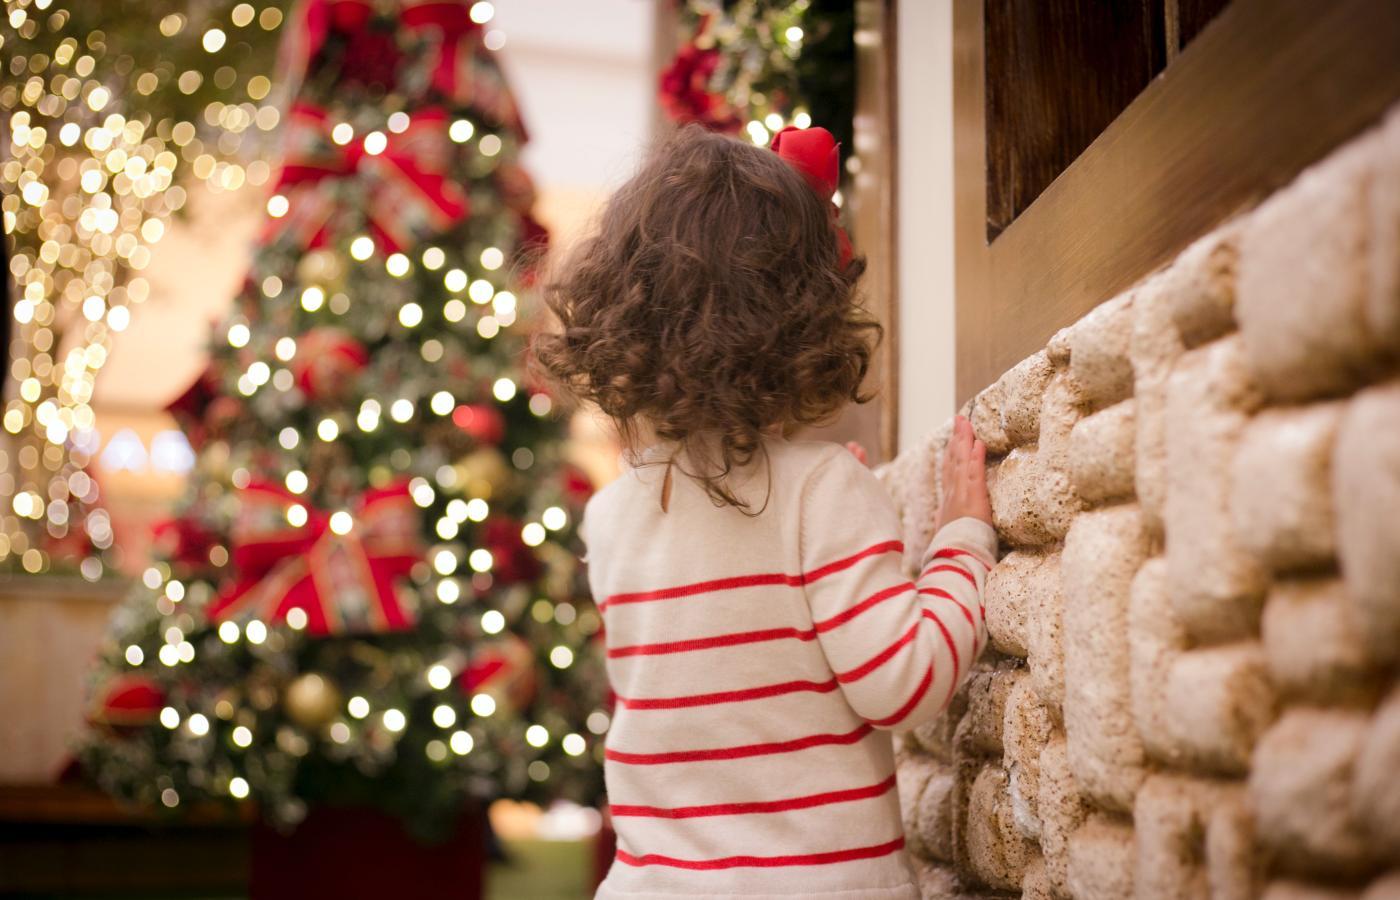 Child in sweater looking at Christmas tree